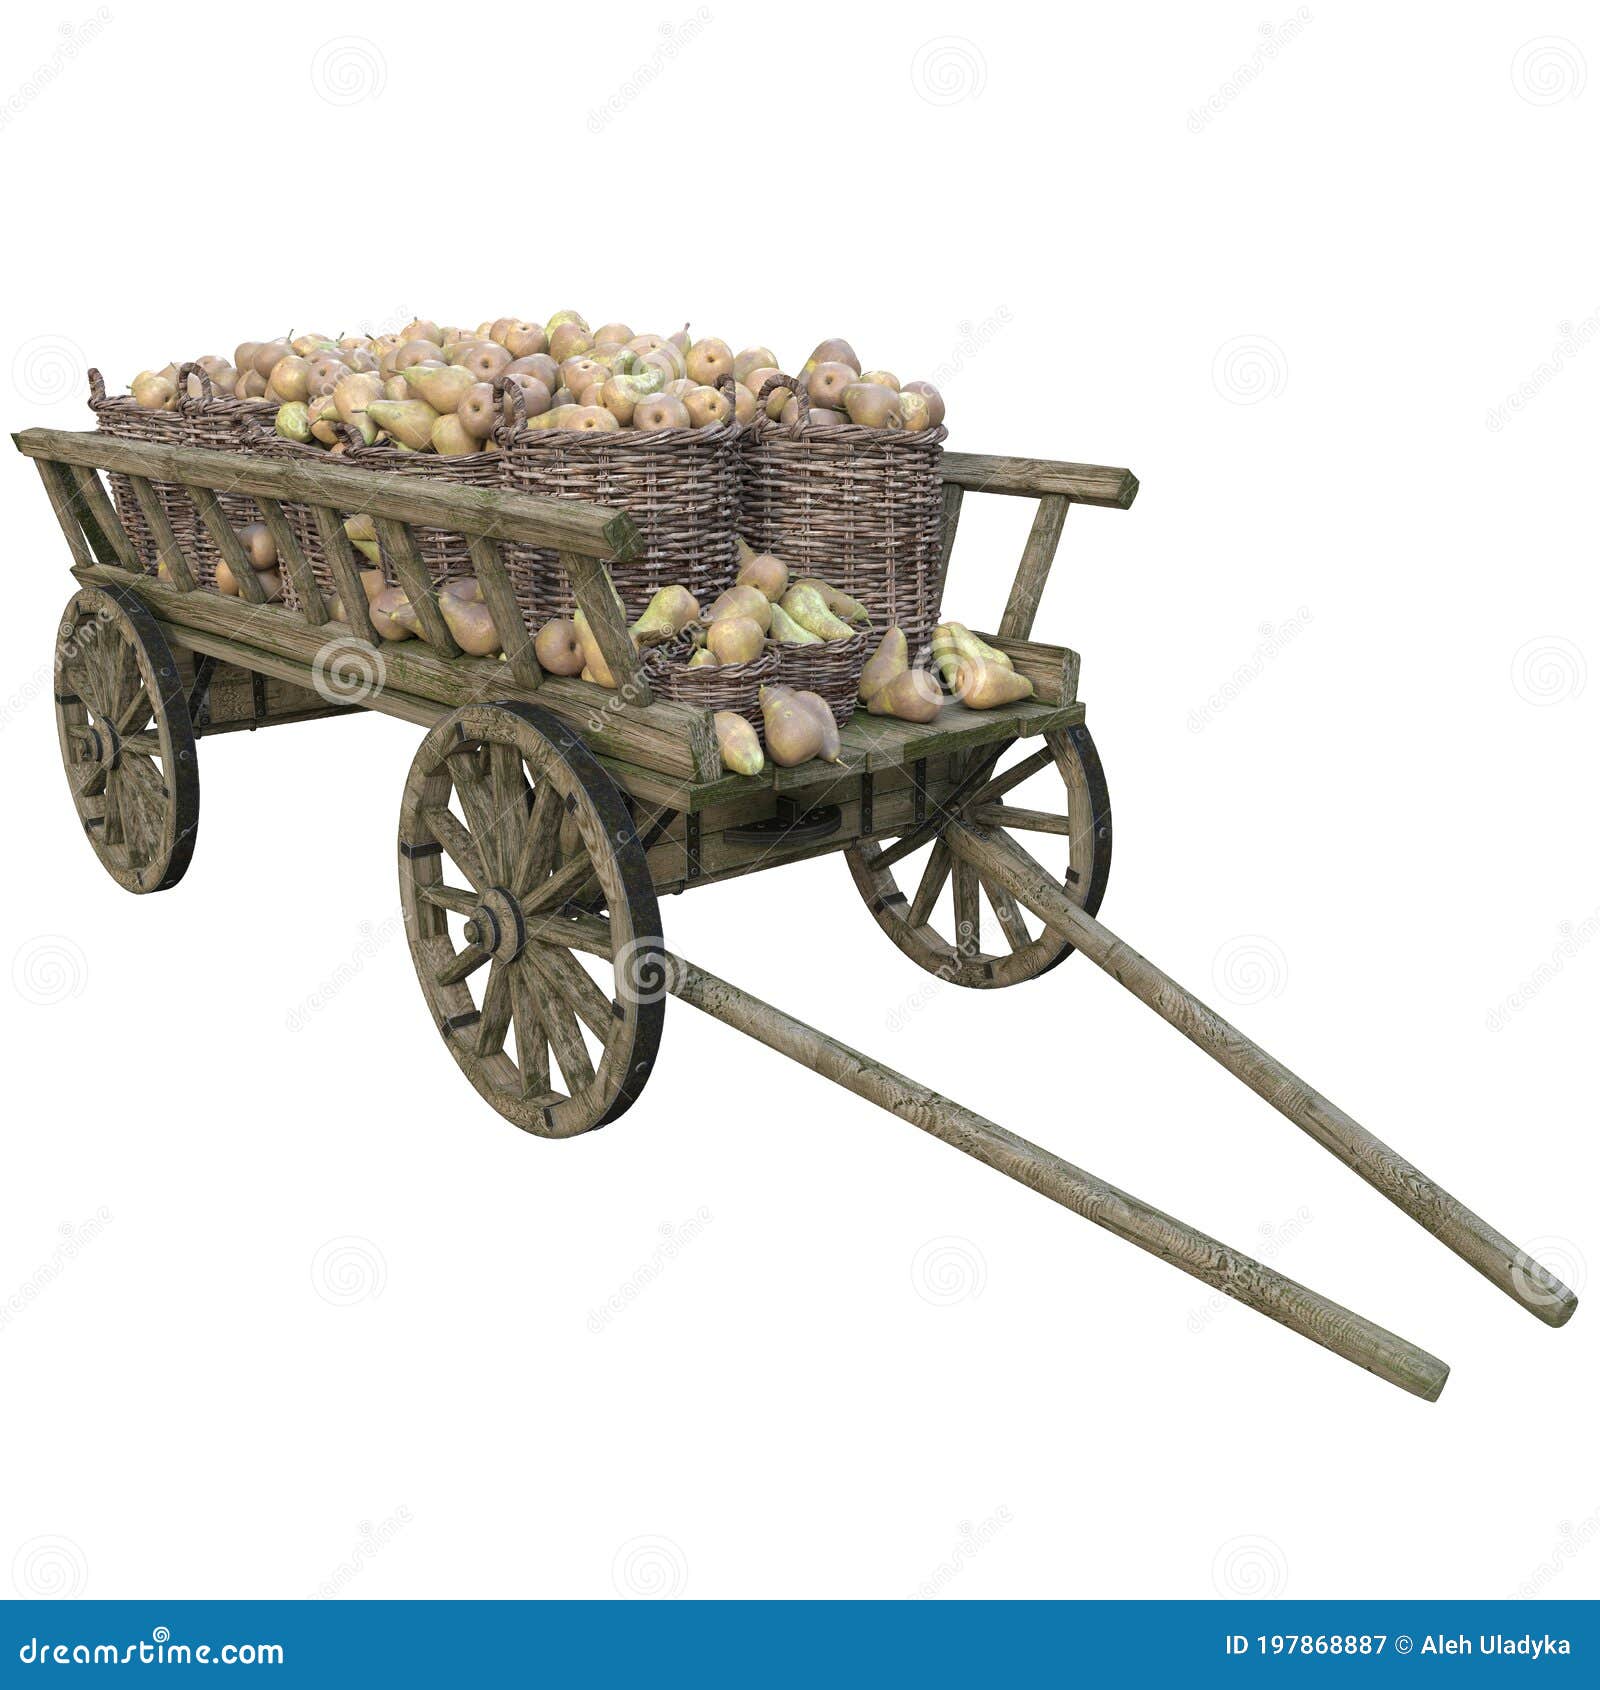 harvest pears in a wooden cart